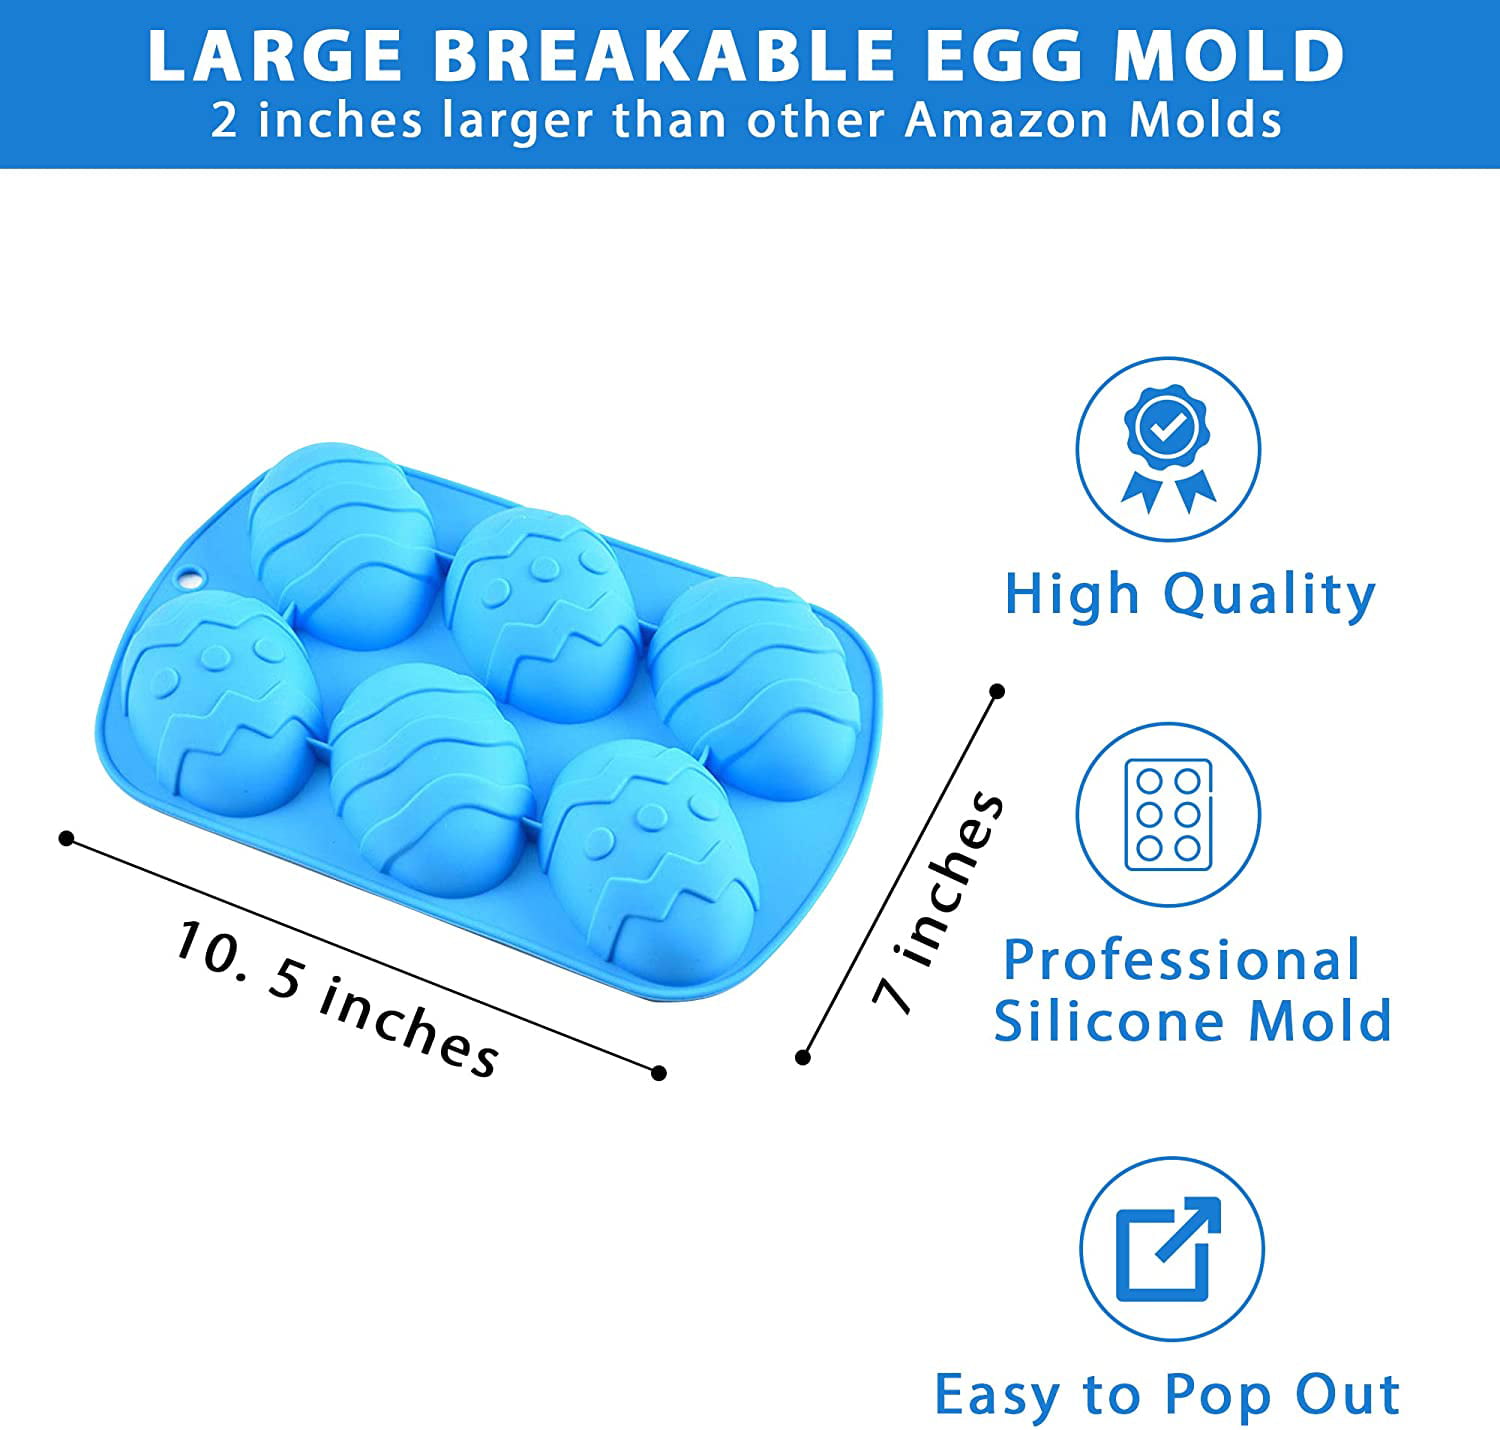 Cake & Marshmallows 3 Pack Large 3.5 in Easter Egg Mold – Egg Silicone Chocolate Mold Candy Large Easter Egg for Cocoa Bombs & Breakable Egg Chocolate Shells- Fill with Peeps Blue 